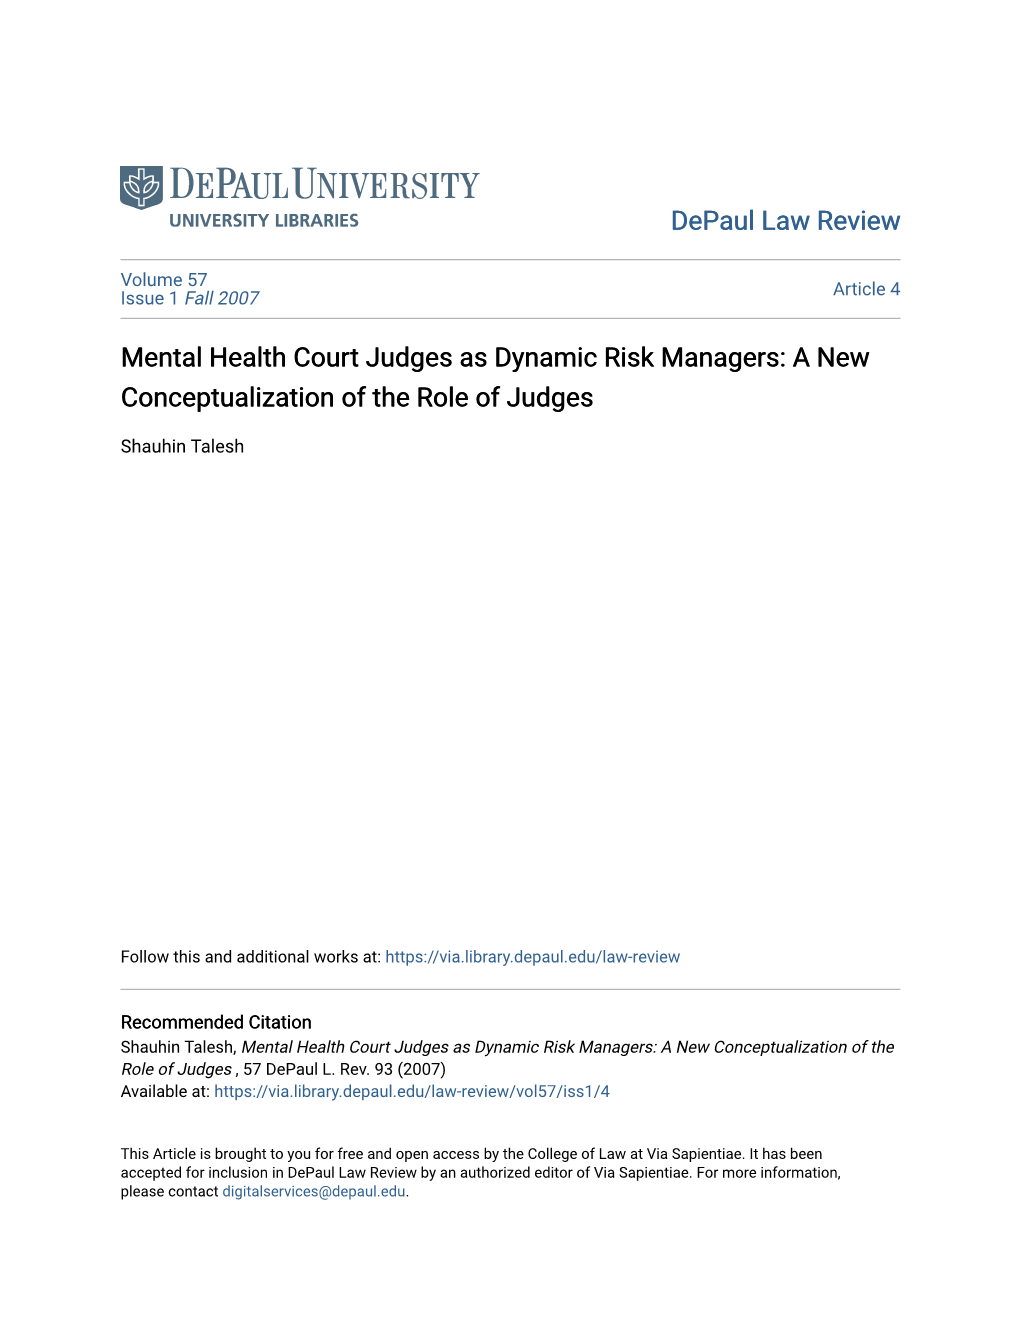 Mental Health Court Judges As Dynamic Risk Managers: a New Conceptualization of the Role of Judges